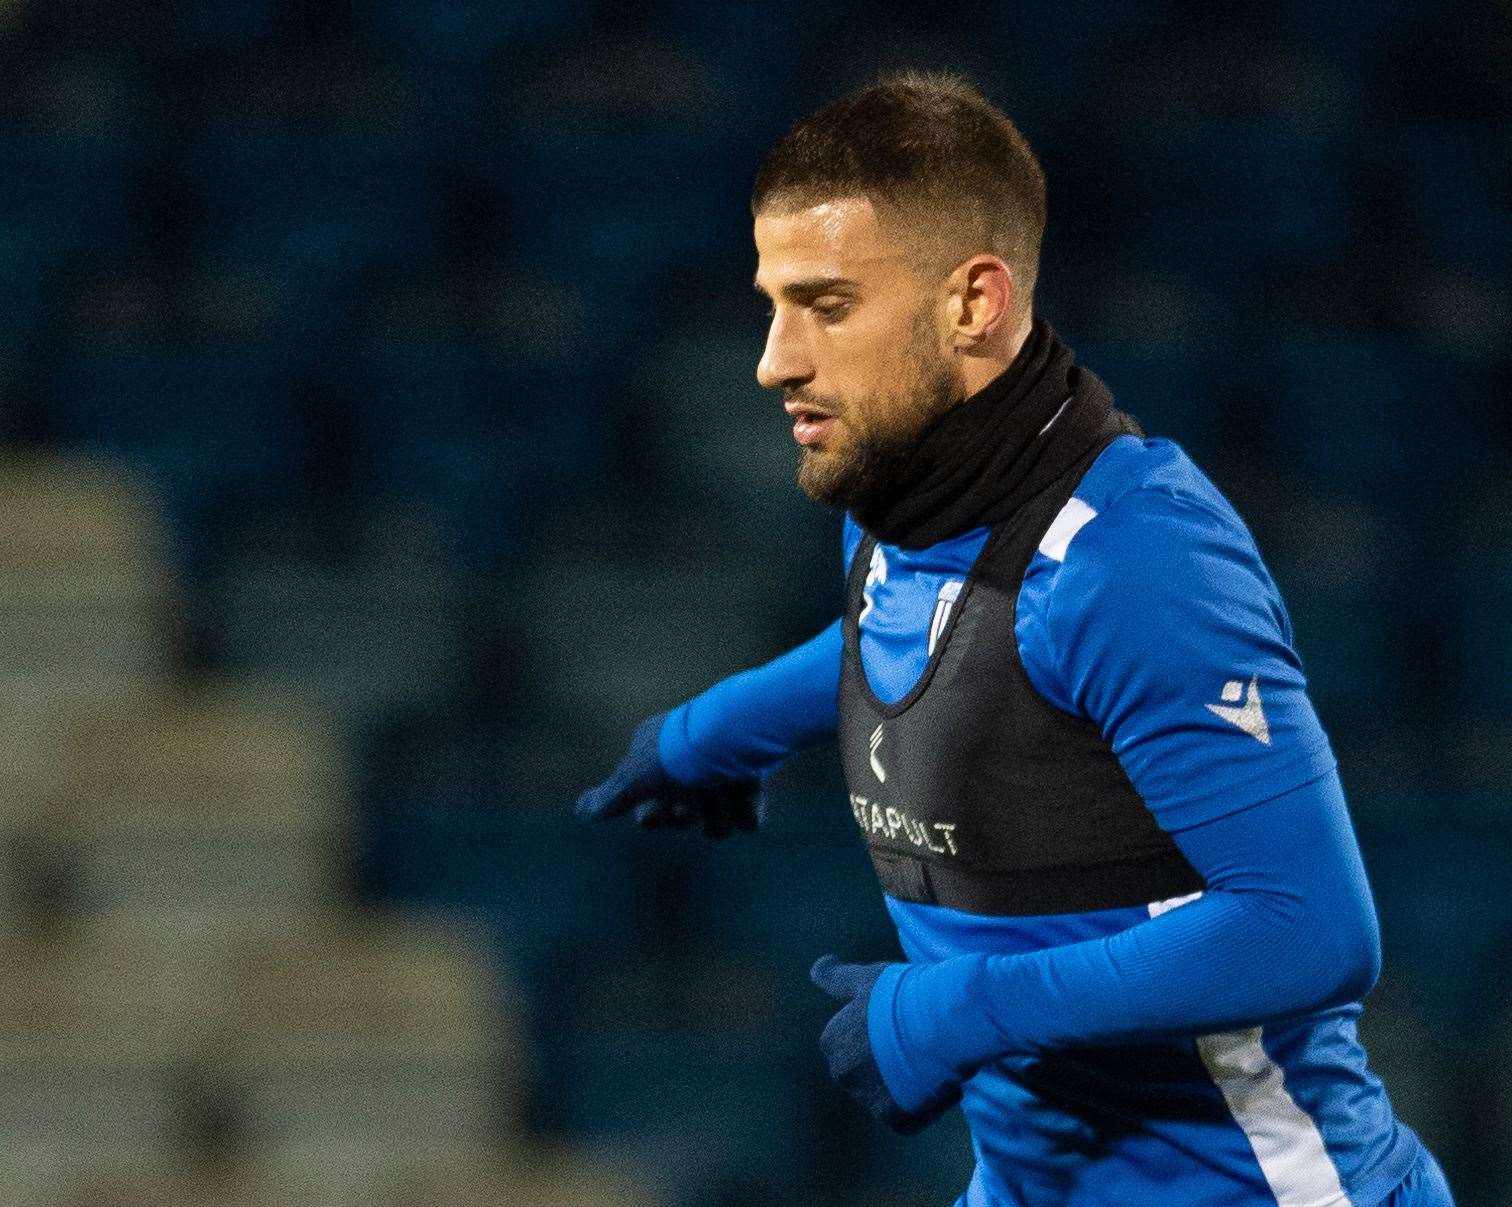 Gillingham defender Max Ehmer is keeping fit at home